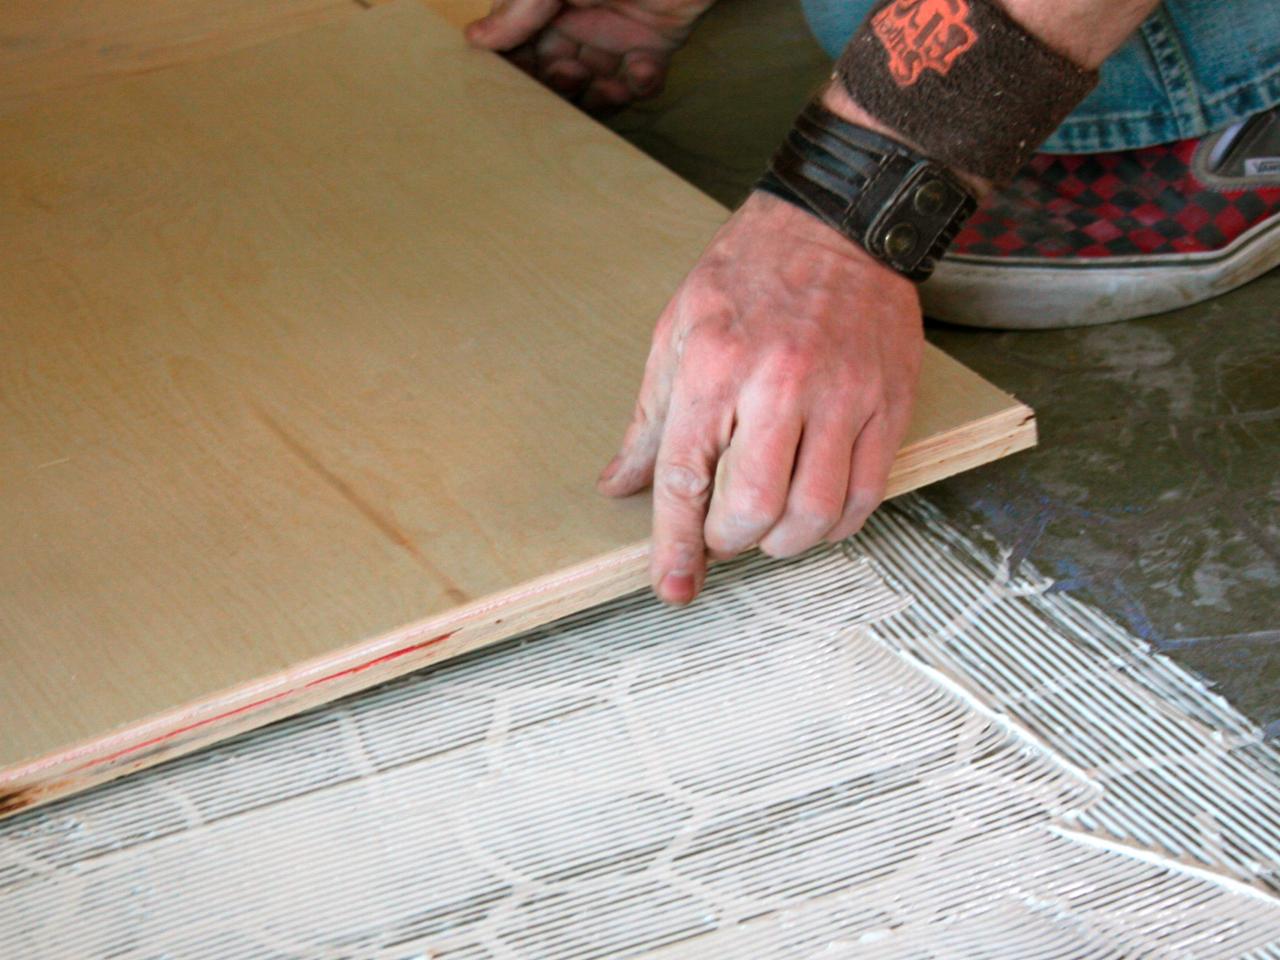 How To Install Plywood Floor Tiles, Tiling On Plywood Floor